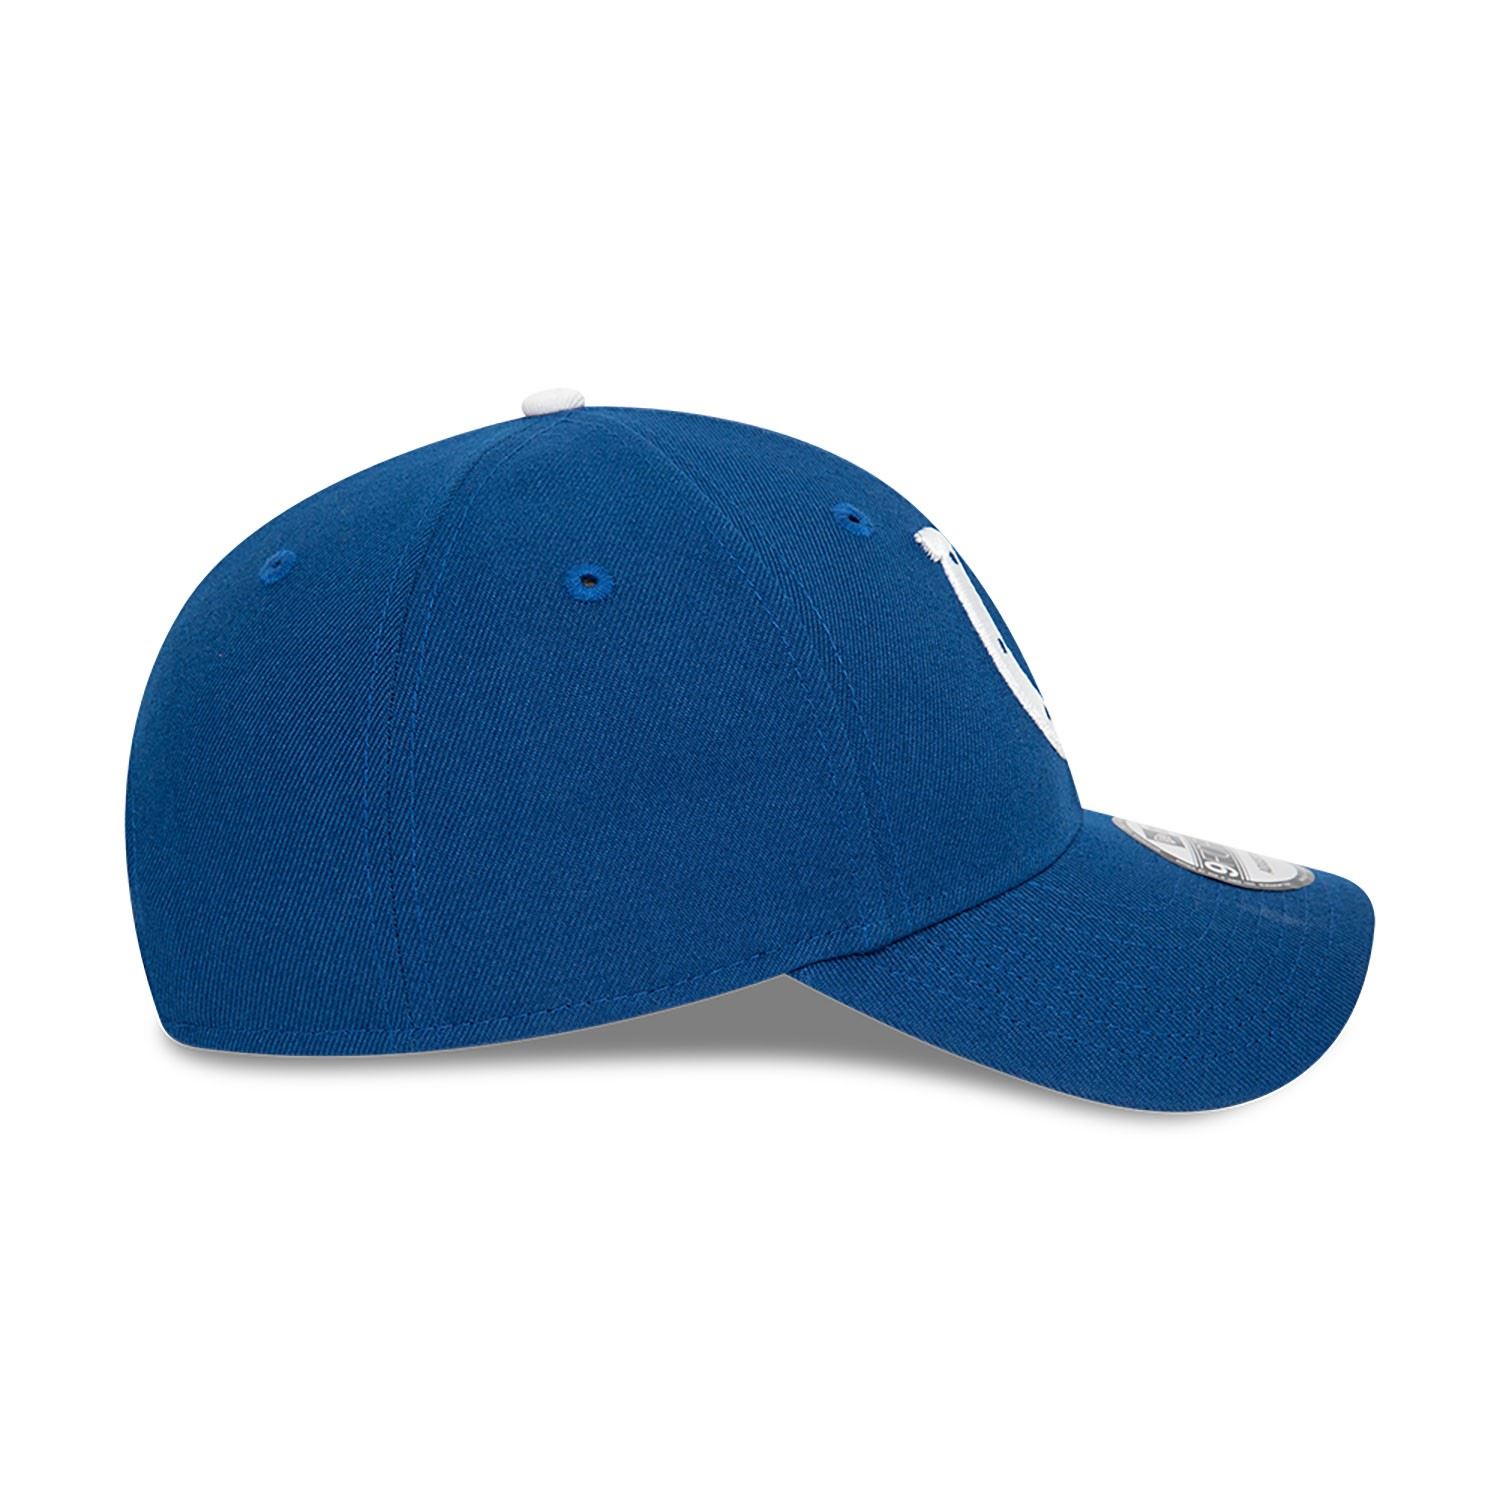 Indianapolis Colts NFL The League Blue 9Forty Adjustable Cap New Era